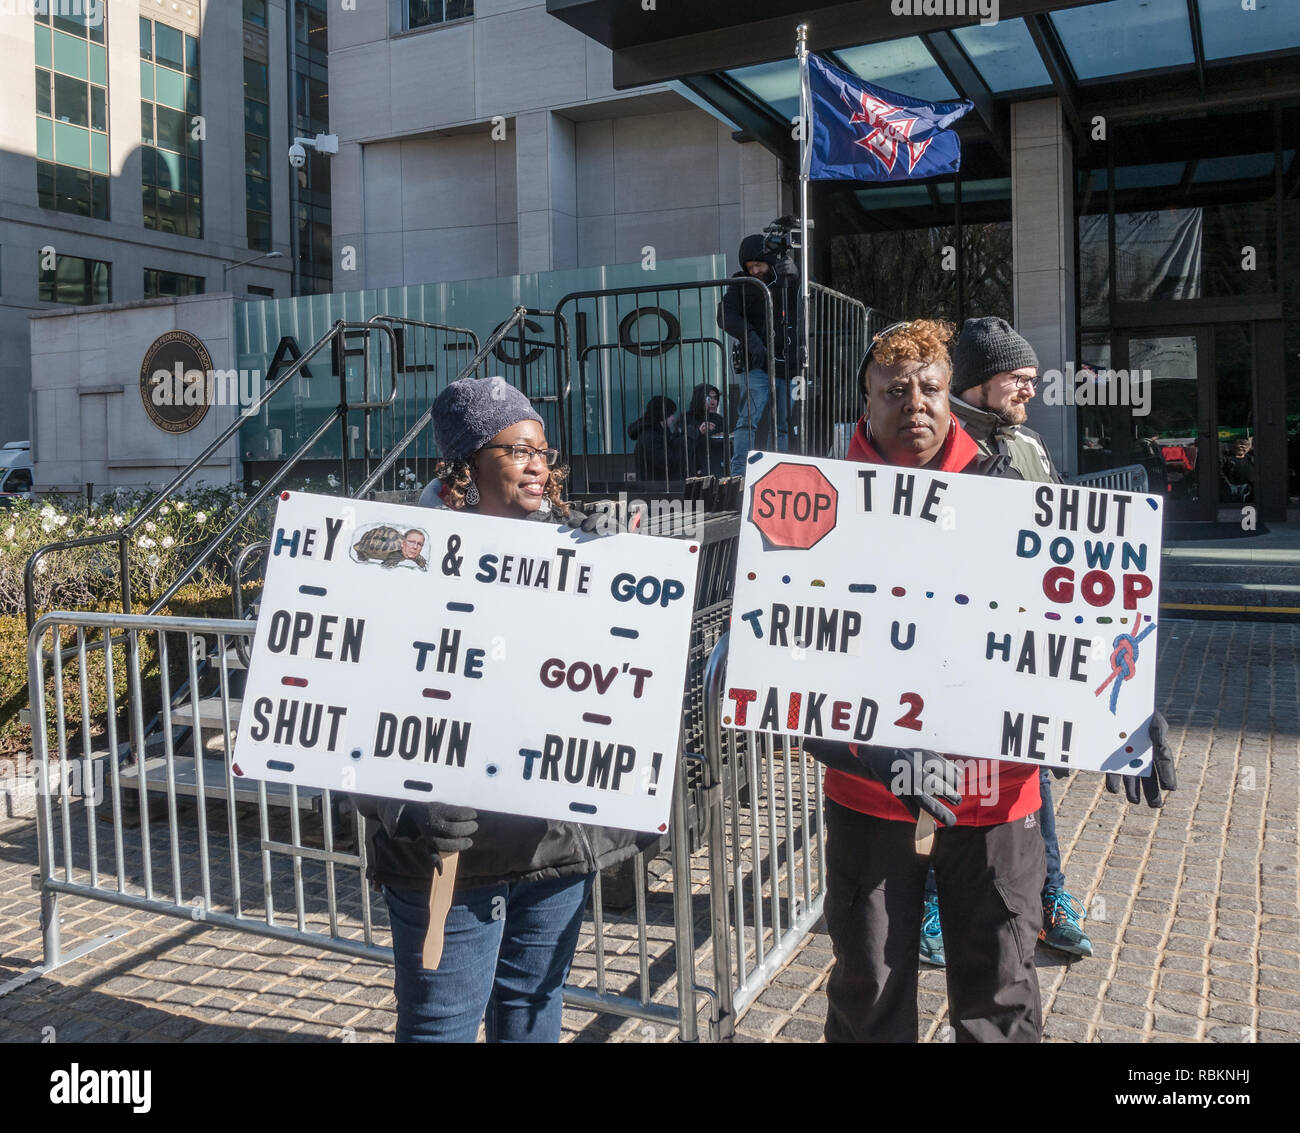 Washington, DC, USA.  10th January, 2019. Protesting the partial government shutdown, hundreds of furloughed as well as unpaid working federal employees, and supporters rallied outside the AFL-CIO headquarters, where they heard from union leaders and members of congress calling for President Trump and Republican senate majority leader Mitch McConnell to end the shutdown. A march to the nearby White House followed. Bob Korn/Alamy Live News Stock Photo